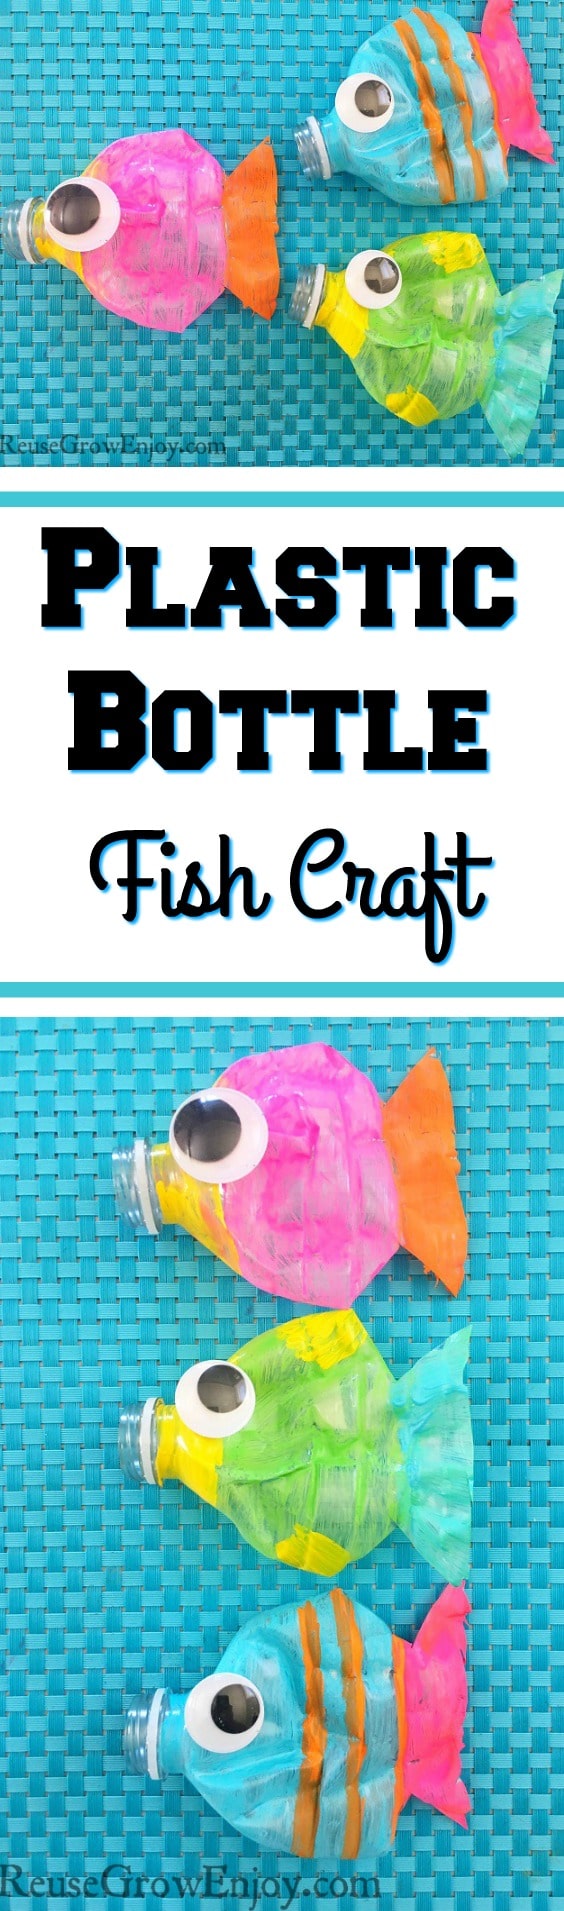 Check out this super cute craft you can do with the kiddos. It is a Plastic Bottle Fish Craft! Great craft to do by reusing plastic bottles.